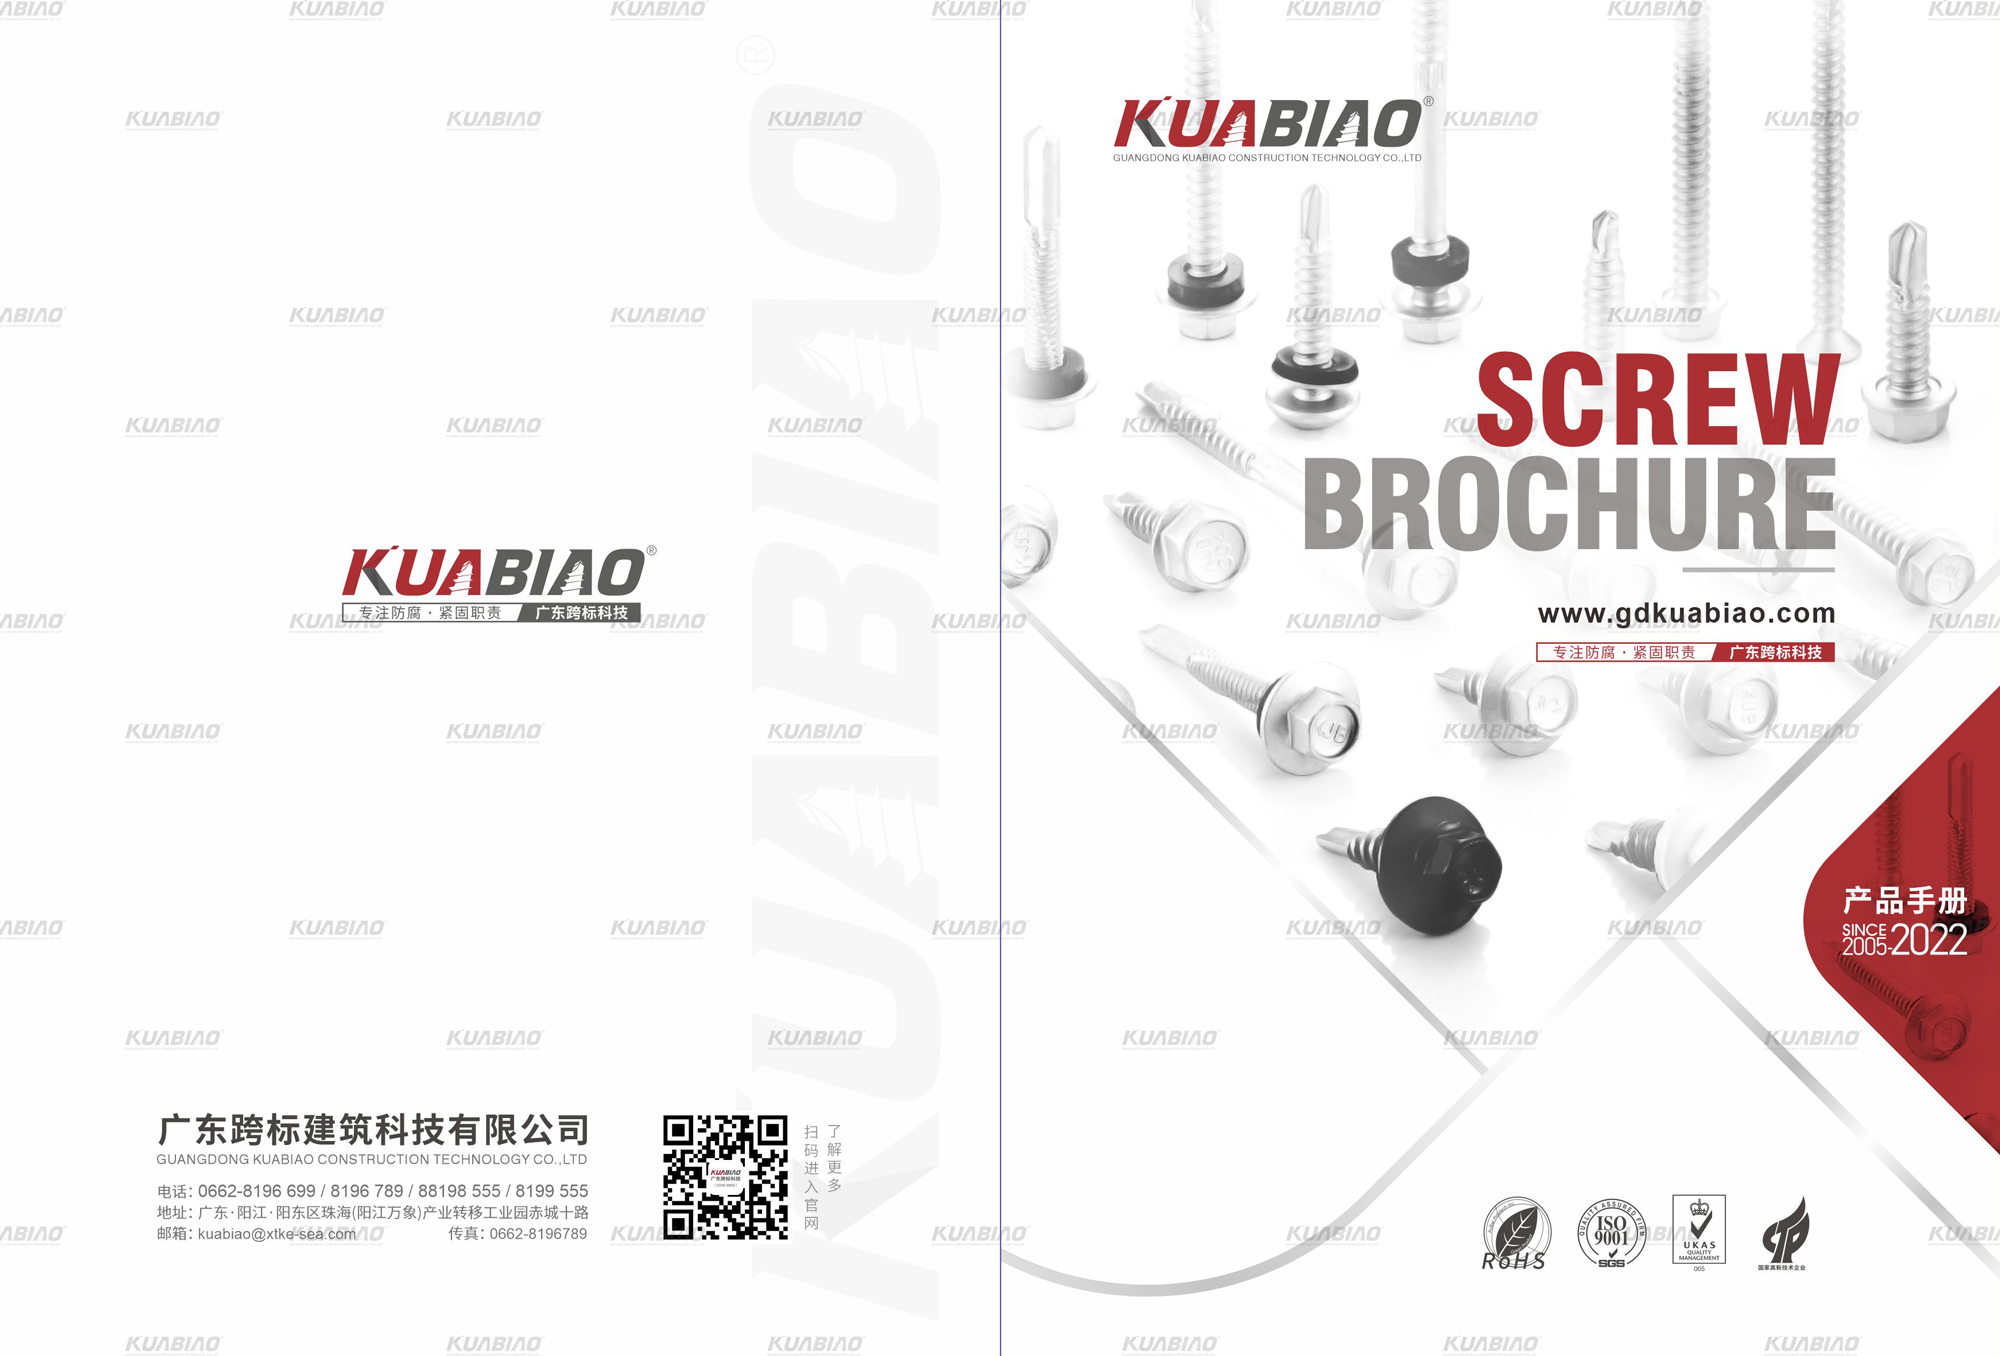 GUANGDONG KUABIAO CONSTRUCTION TECHNOLOGY CO., LTD.  Online Catalogues